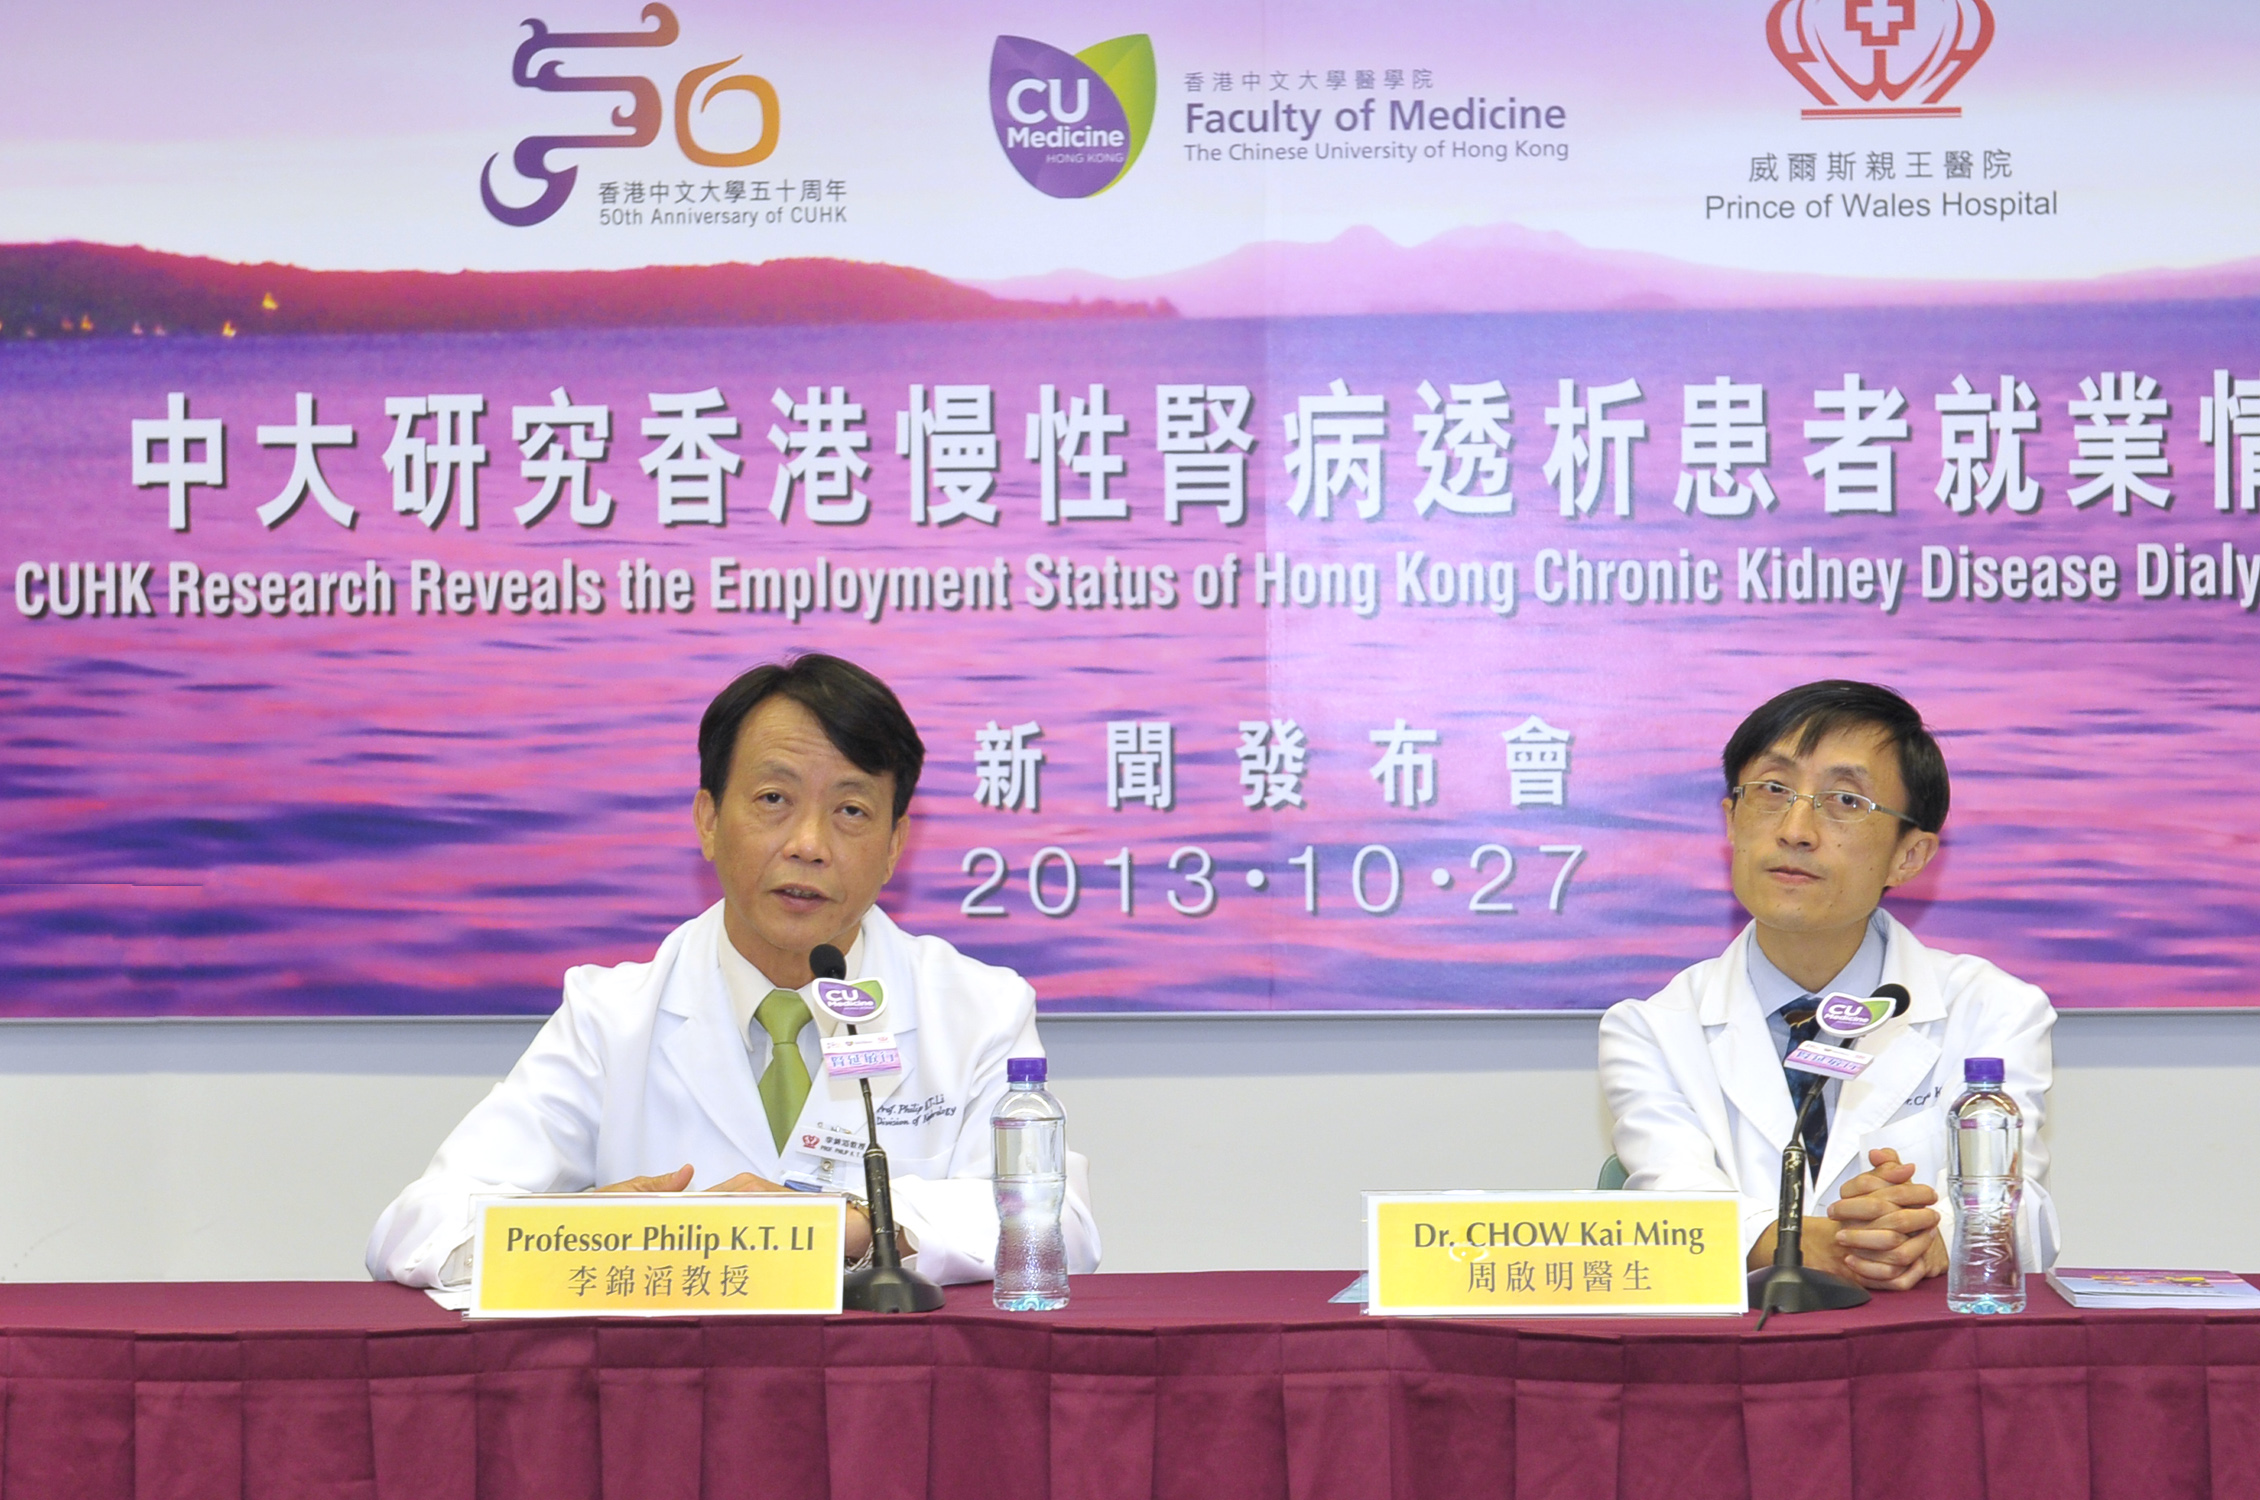 (From left) Prof. Philip Kam Tao LI, Chief of Nephrology and Honorary Professor, and Dr. Kai Ming CHOW, Honorary Clinical Associate Professor, Department of Medicine and Therapeutics at CUHK present their recent research findings on the employment status of chronic kidney disease dialysis patients on peritoneal dialysis in the Prince of Wales Hospital.